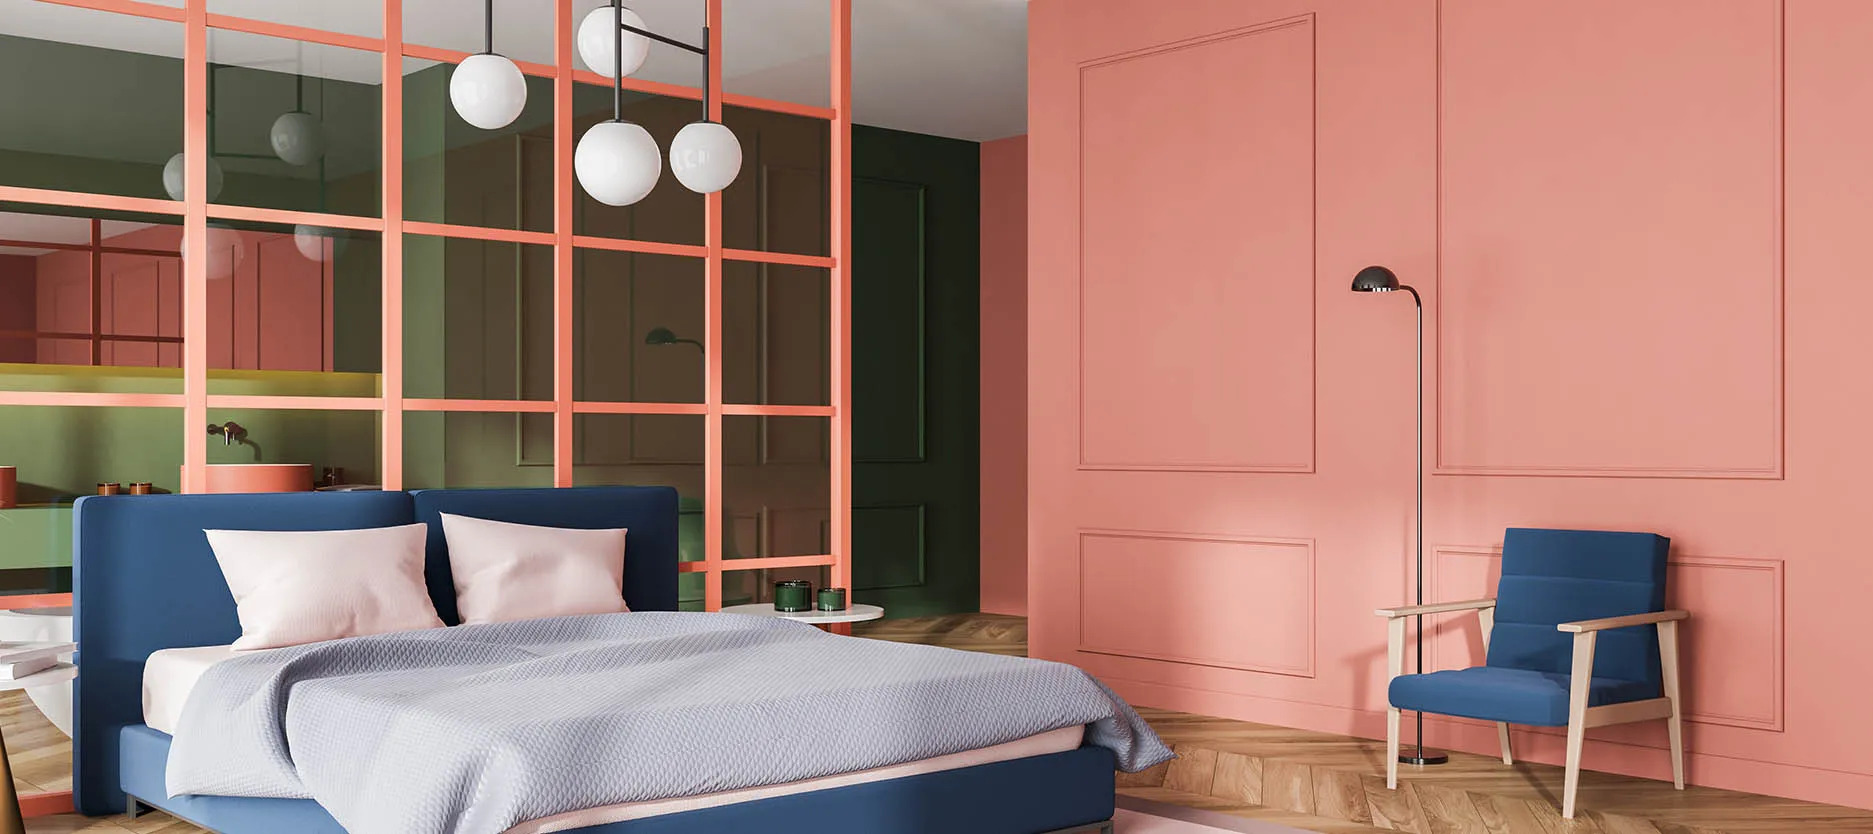 Peach and white are one of the best bedroom colors for couples